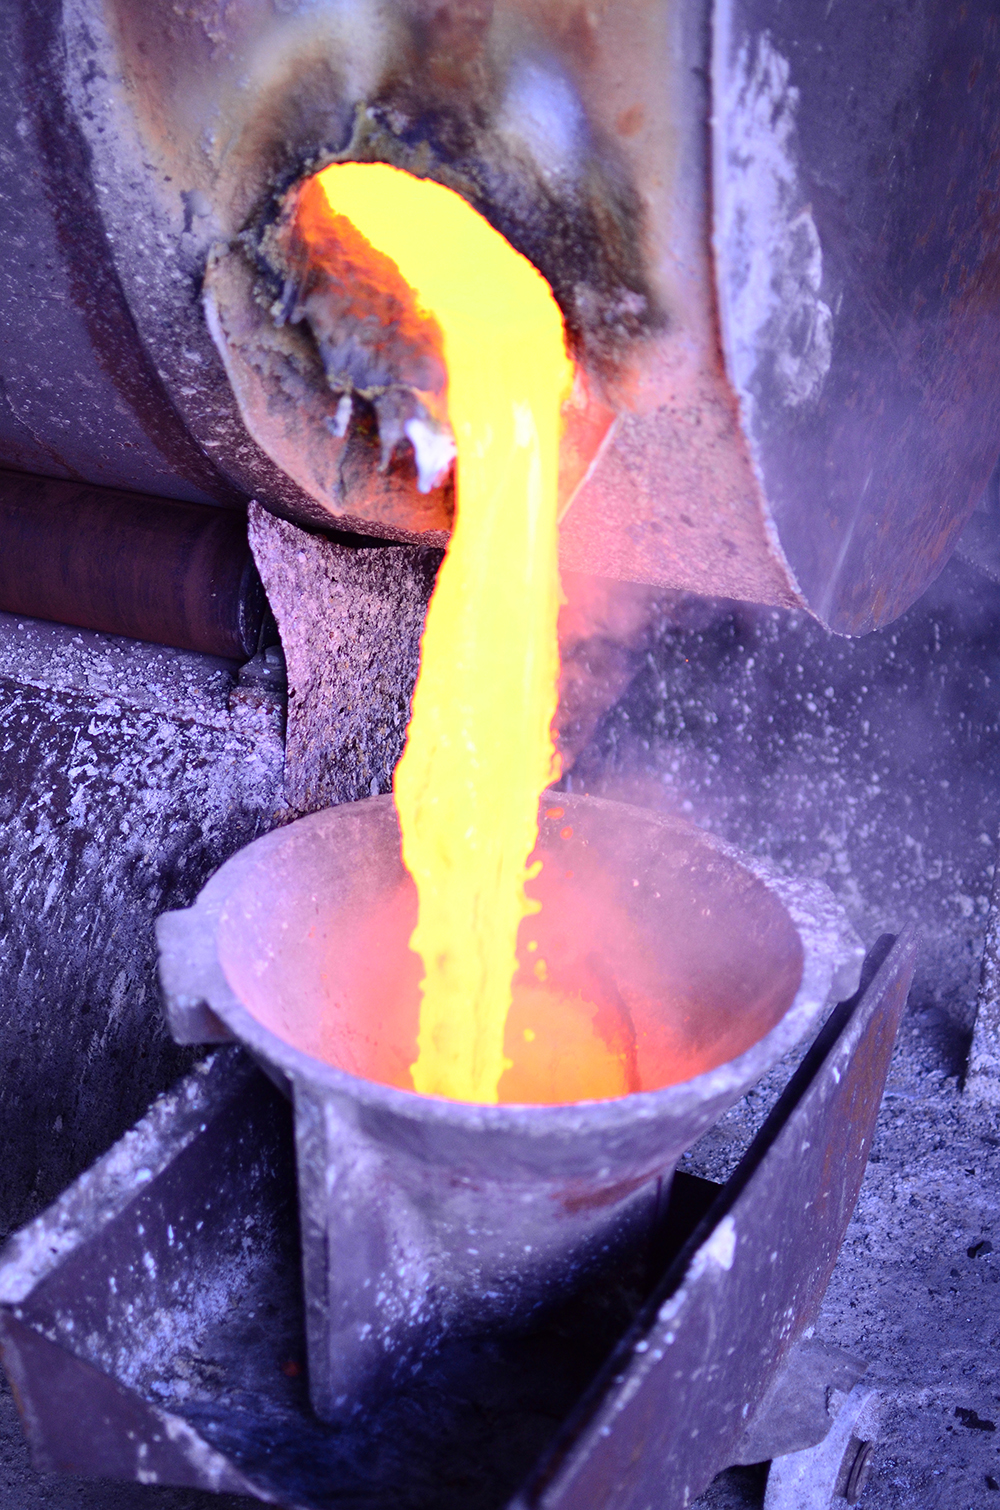 Molten Metal Pouring From Furnace